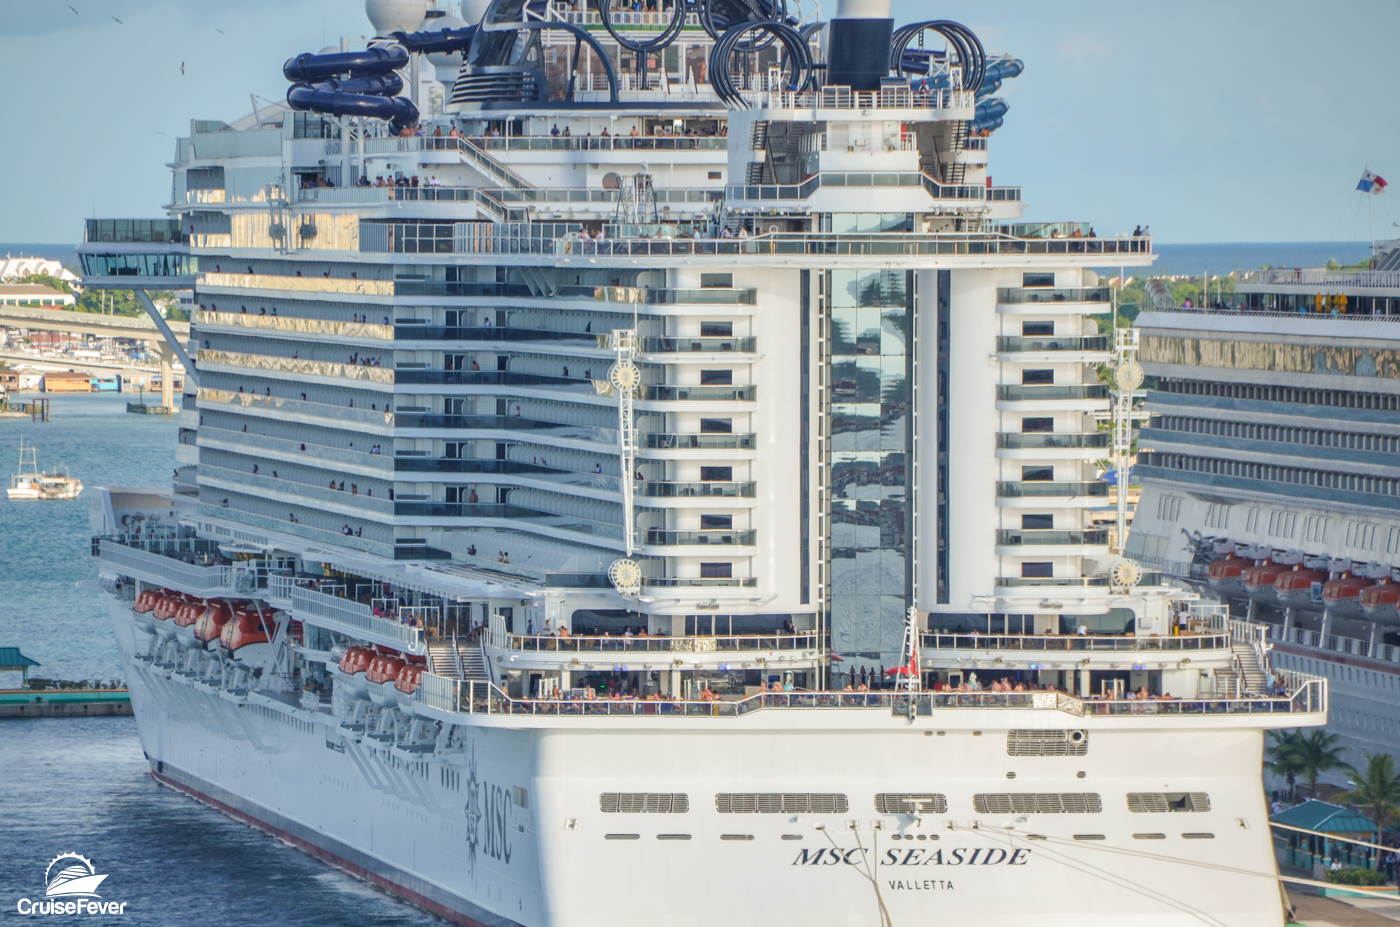 MSC Cruises Adds Flexibility When Booking Future Cruises on a Ship